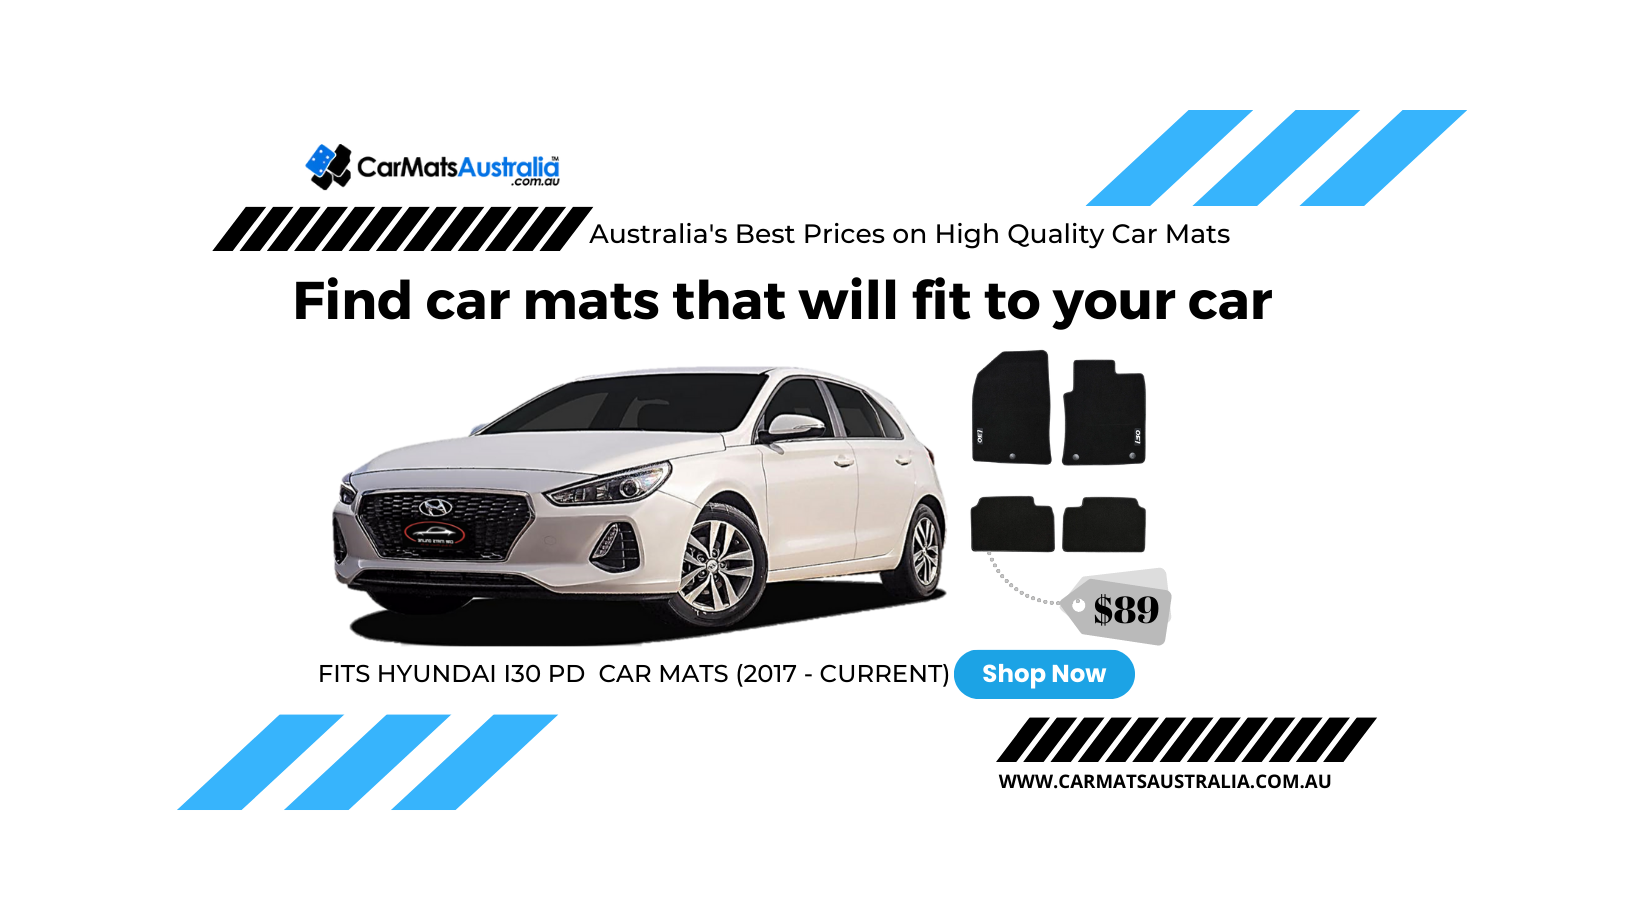 Buy Car Floor Mats Online Exact as per Car Model with Free Delivery